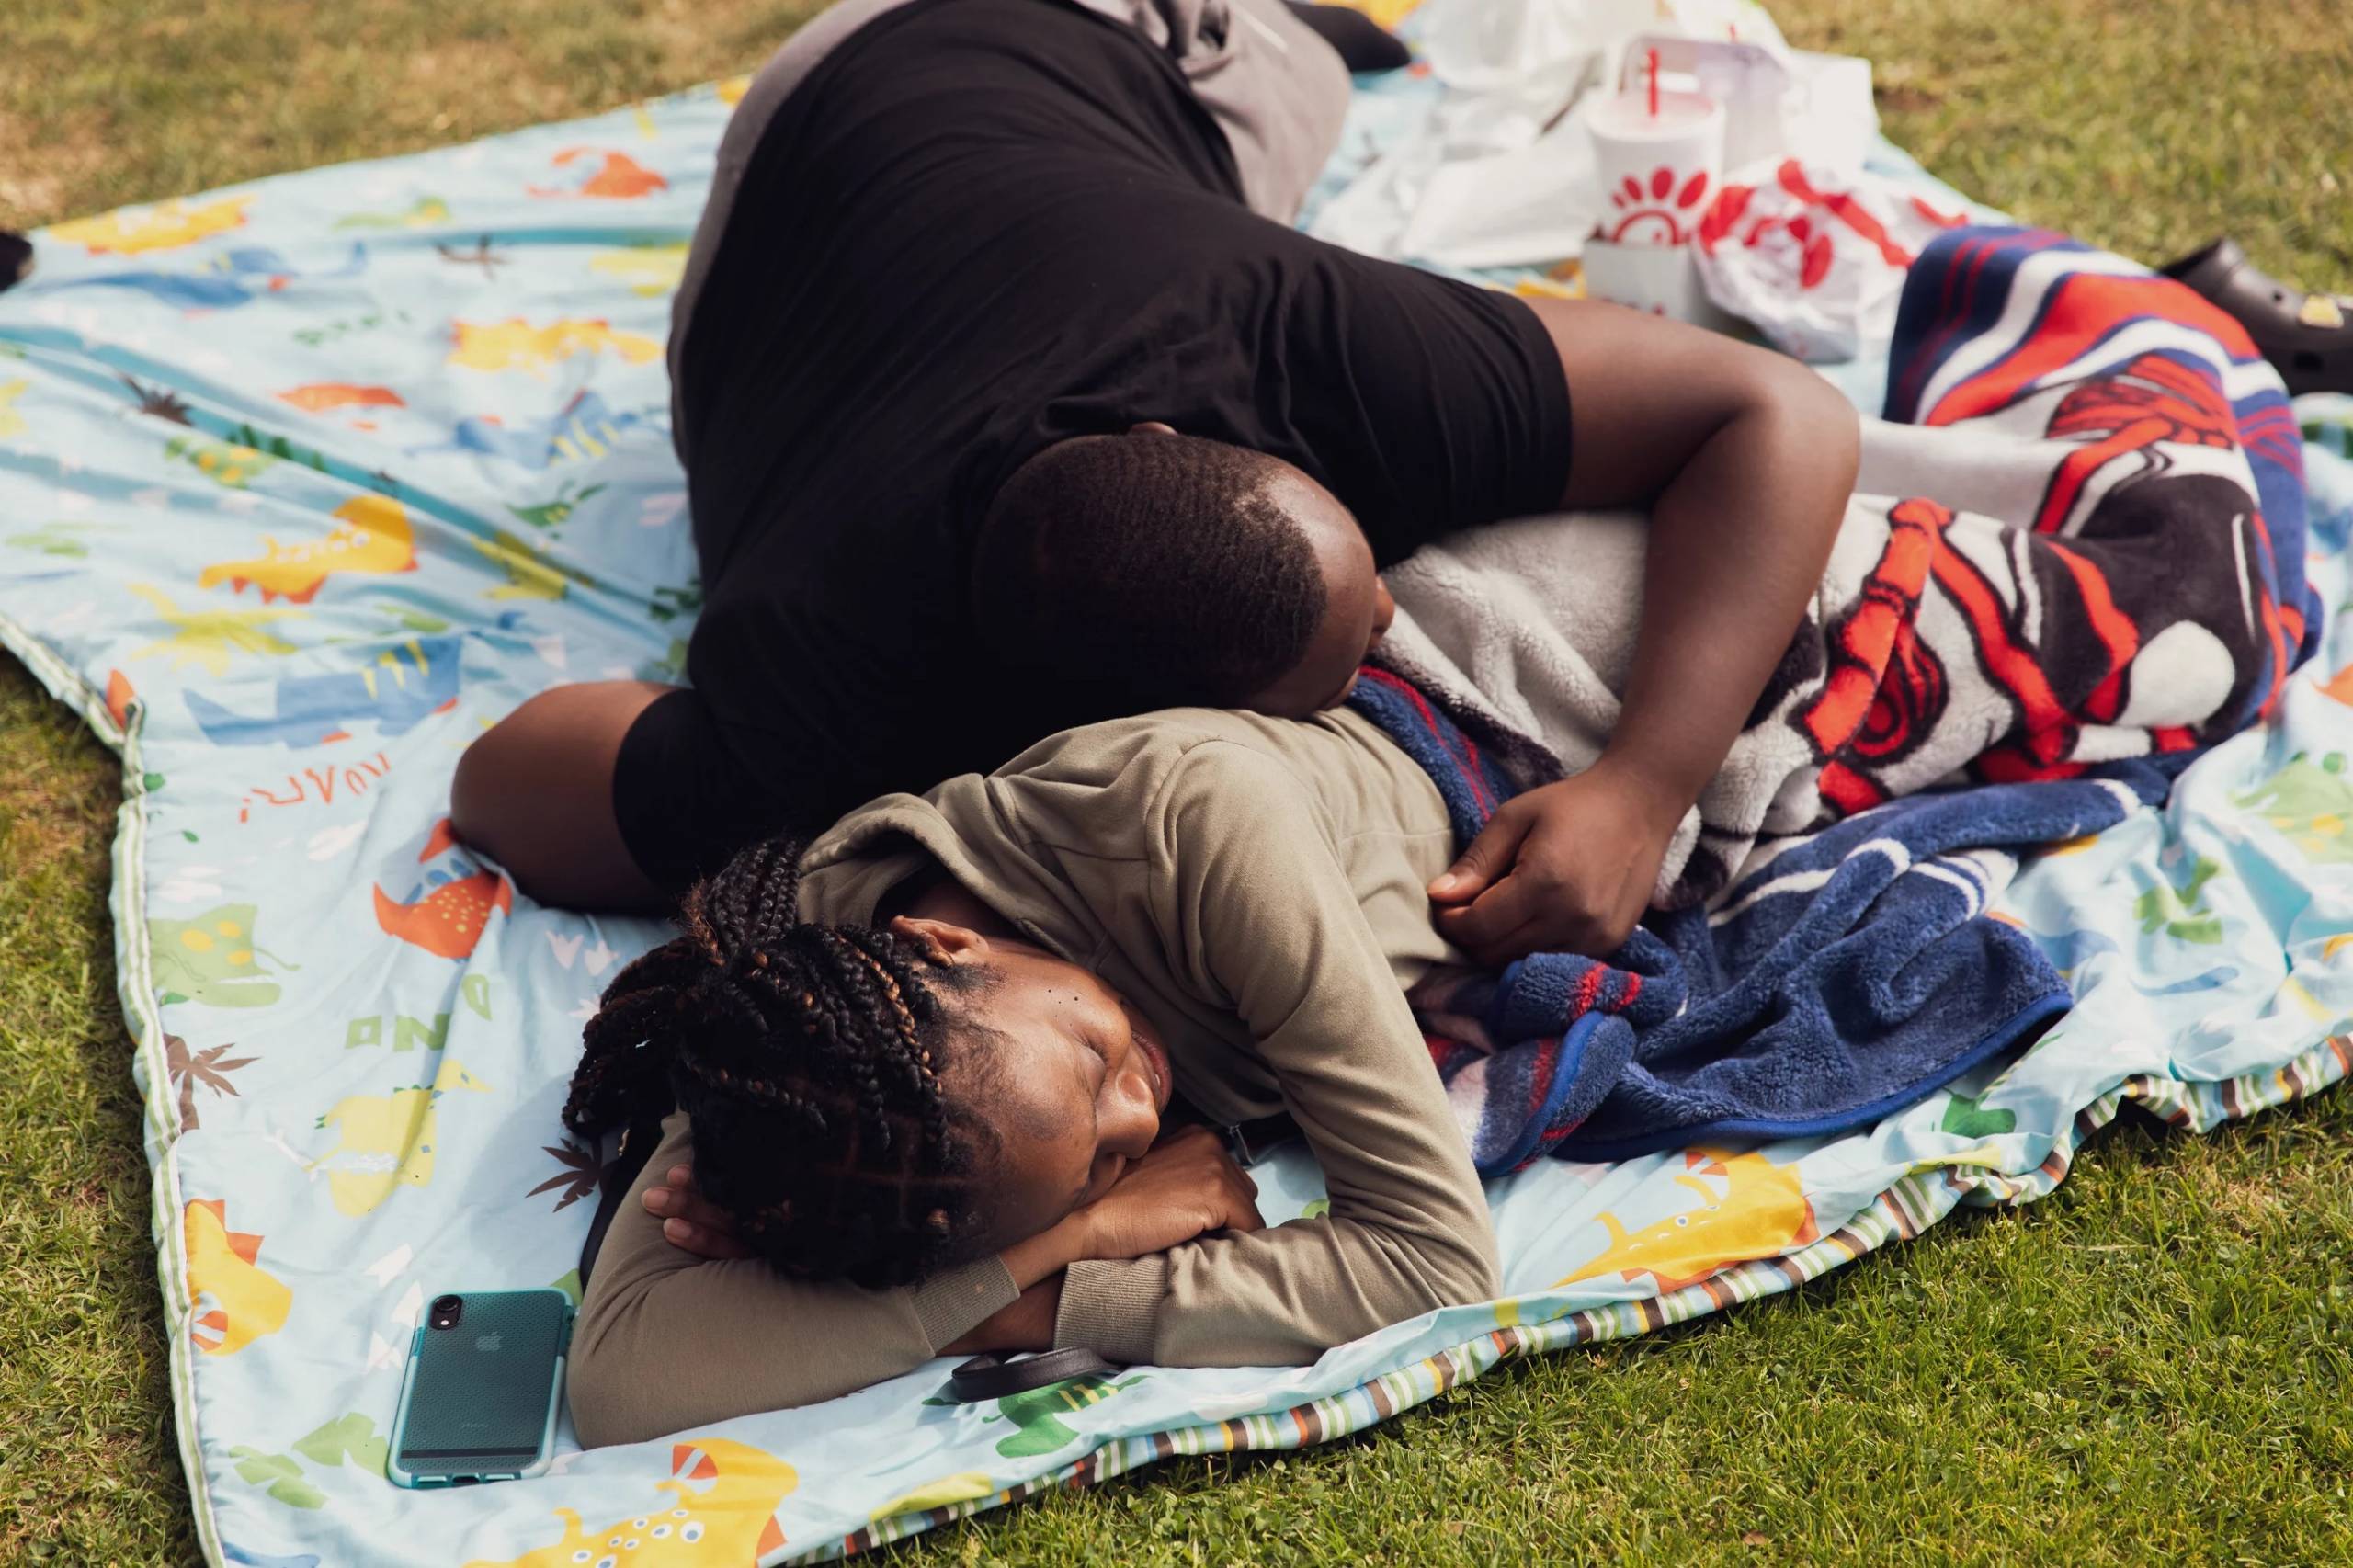 A couple cuddles on a fuzzy blanket on the grass.